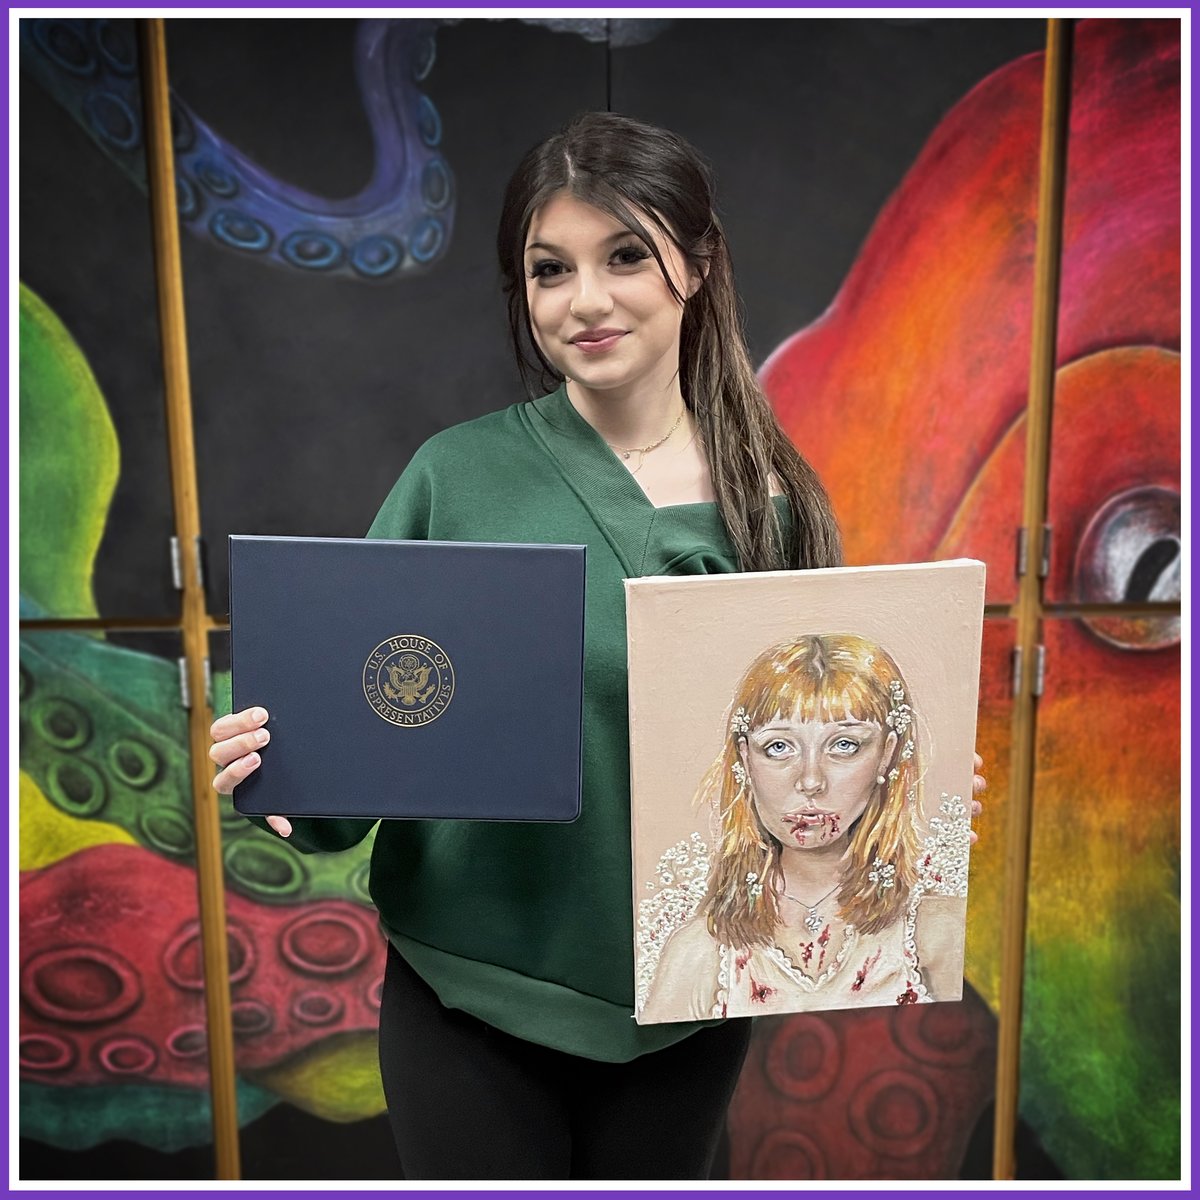 DVC senior Ava Rega was recognized as 'Best in School' for her piece 'Frankie' during the sixth district congressional art show at @MontCollegeArt. The piece is mostly acrylic paint with accents of colored pencil and pastel chalk. Well done Ava! #WeAreShawsheen